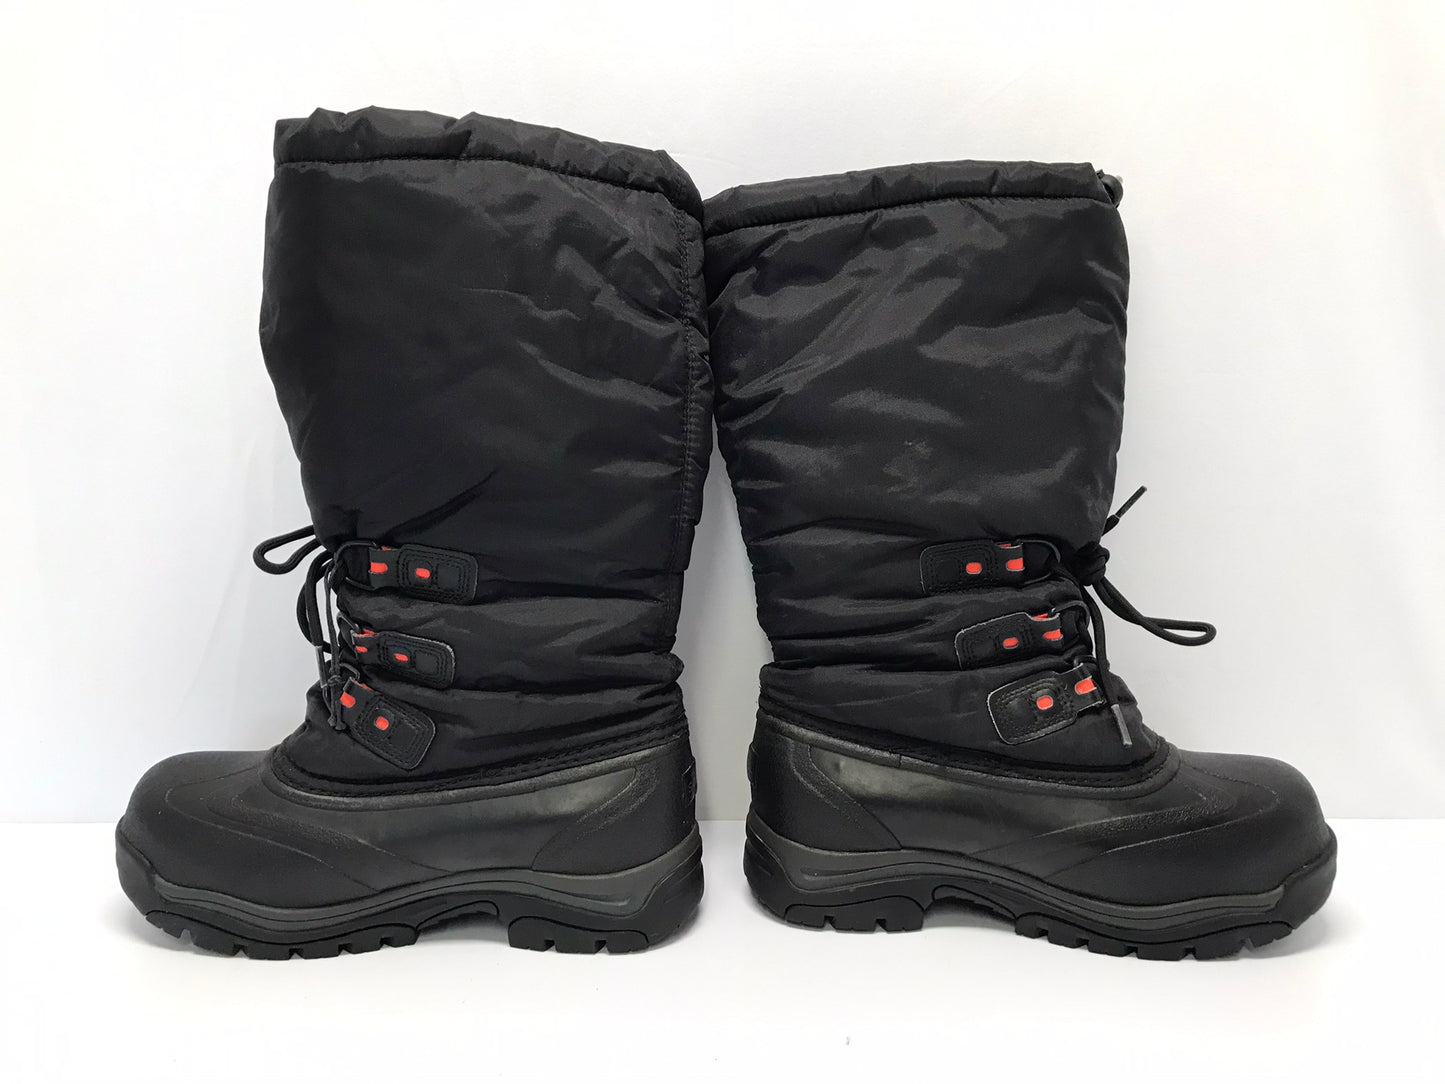 Winter Boots Ladies Size 8 Sorel Omni Heat With Liners As New Excellent Black Orange